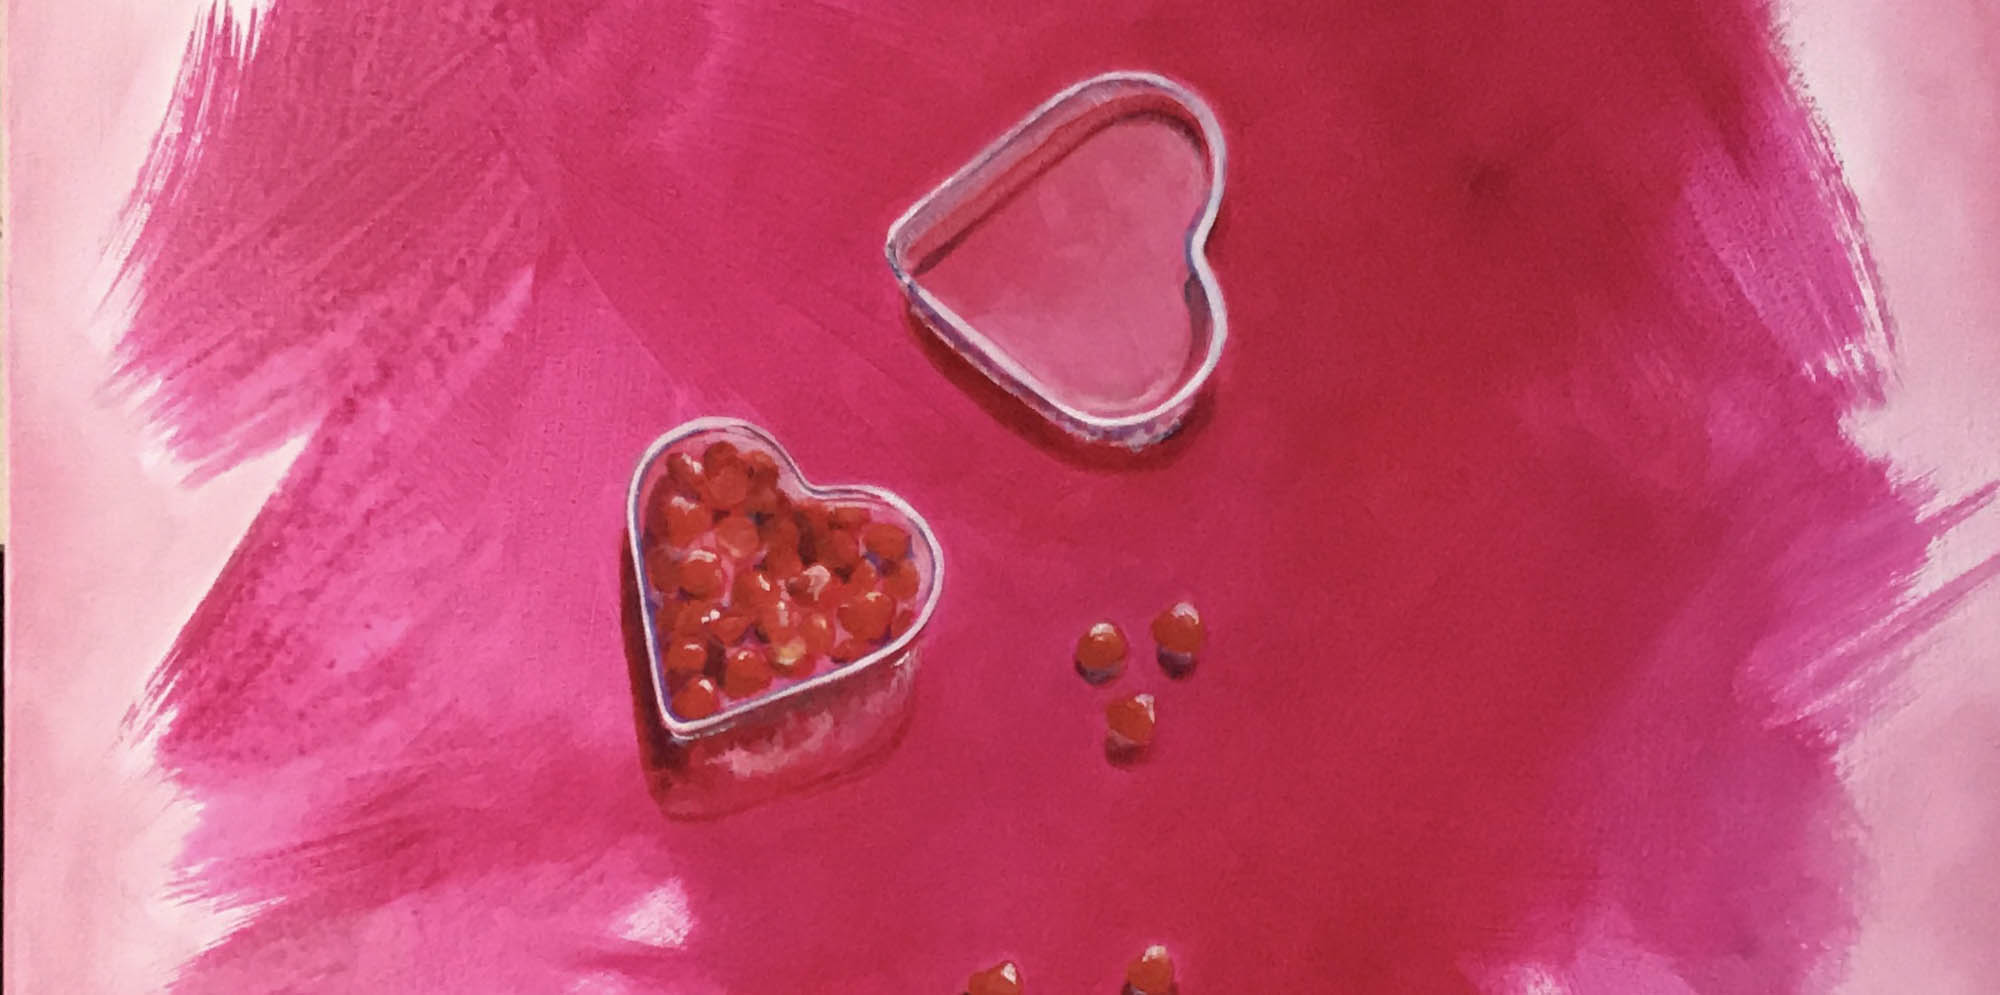 cinnamon hearts is a painting of that delicious heart shaped candy